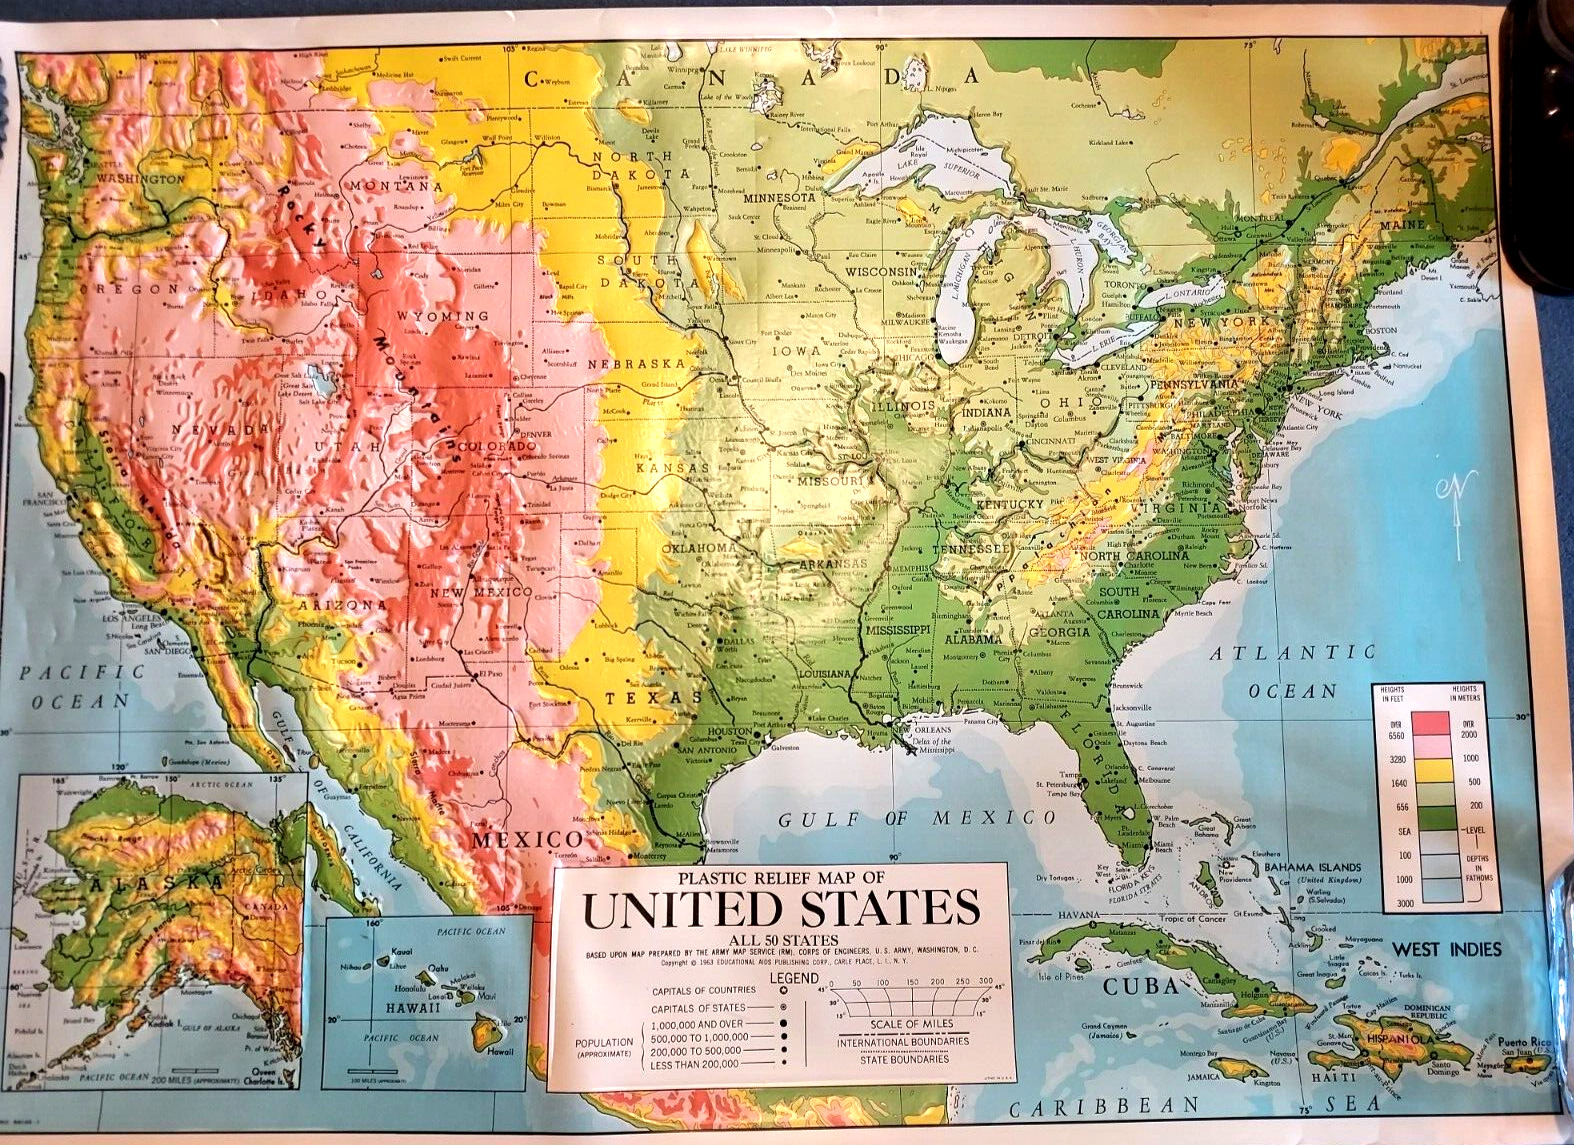 Vintage 1963 Plastic Relief Map of The United States Educational Aids U. S. Army